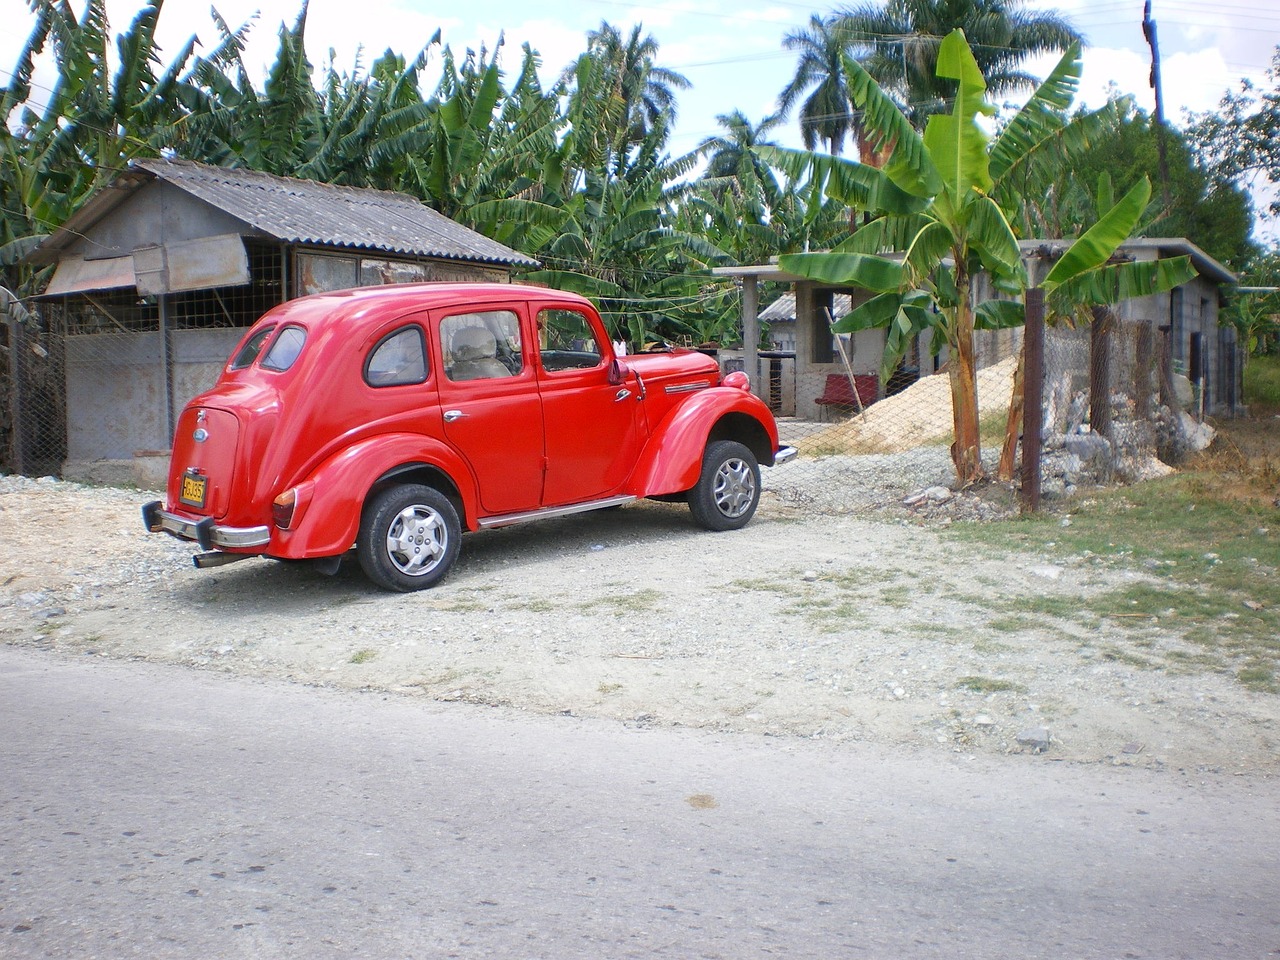 a red car is parked on the side of the road, by Ladrönn, flickr, cobra, jamaican, moskvich, hut, palm